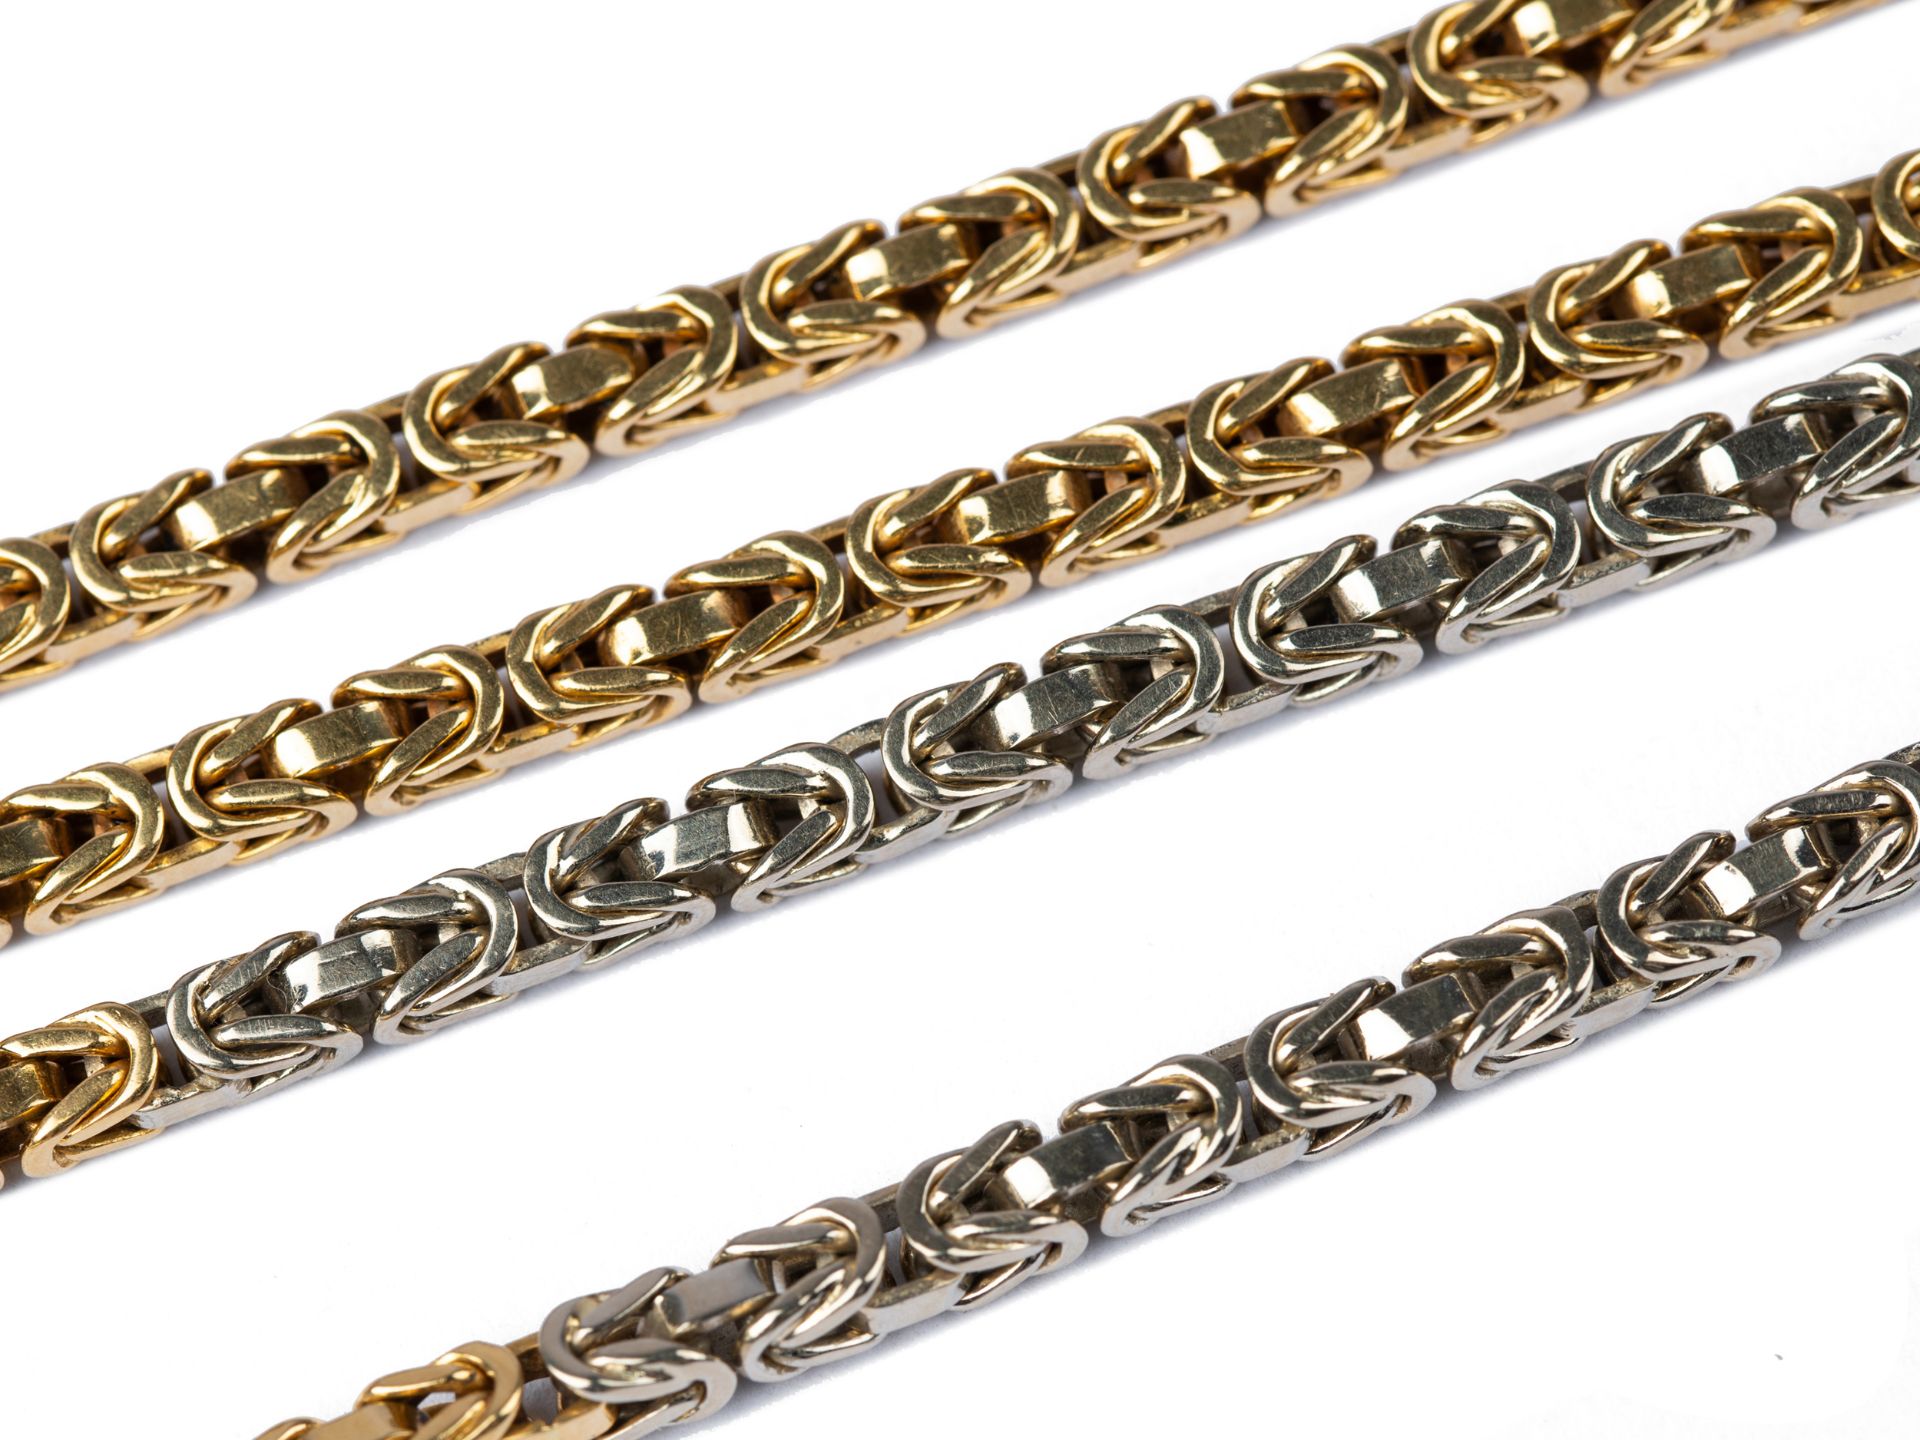 King necklace bicolour, 18kt yellow & white gold - Image 2 of 4